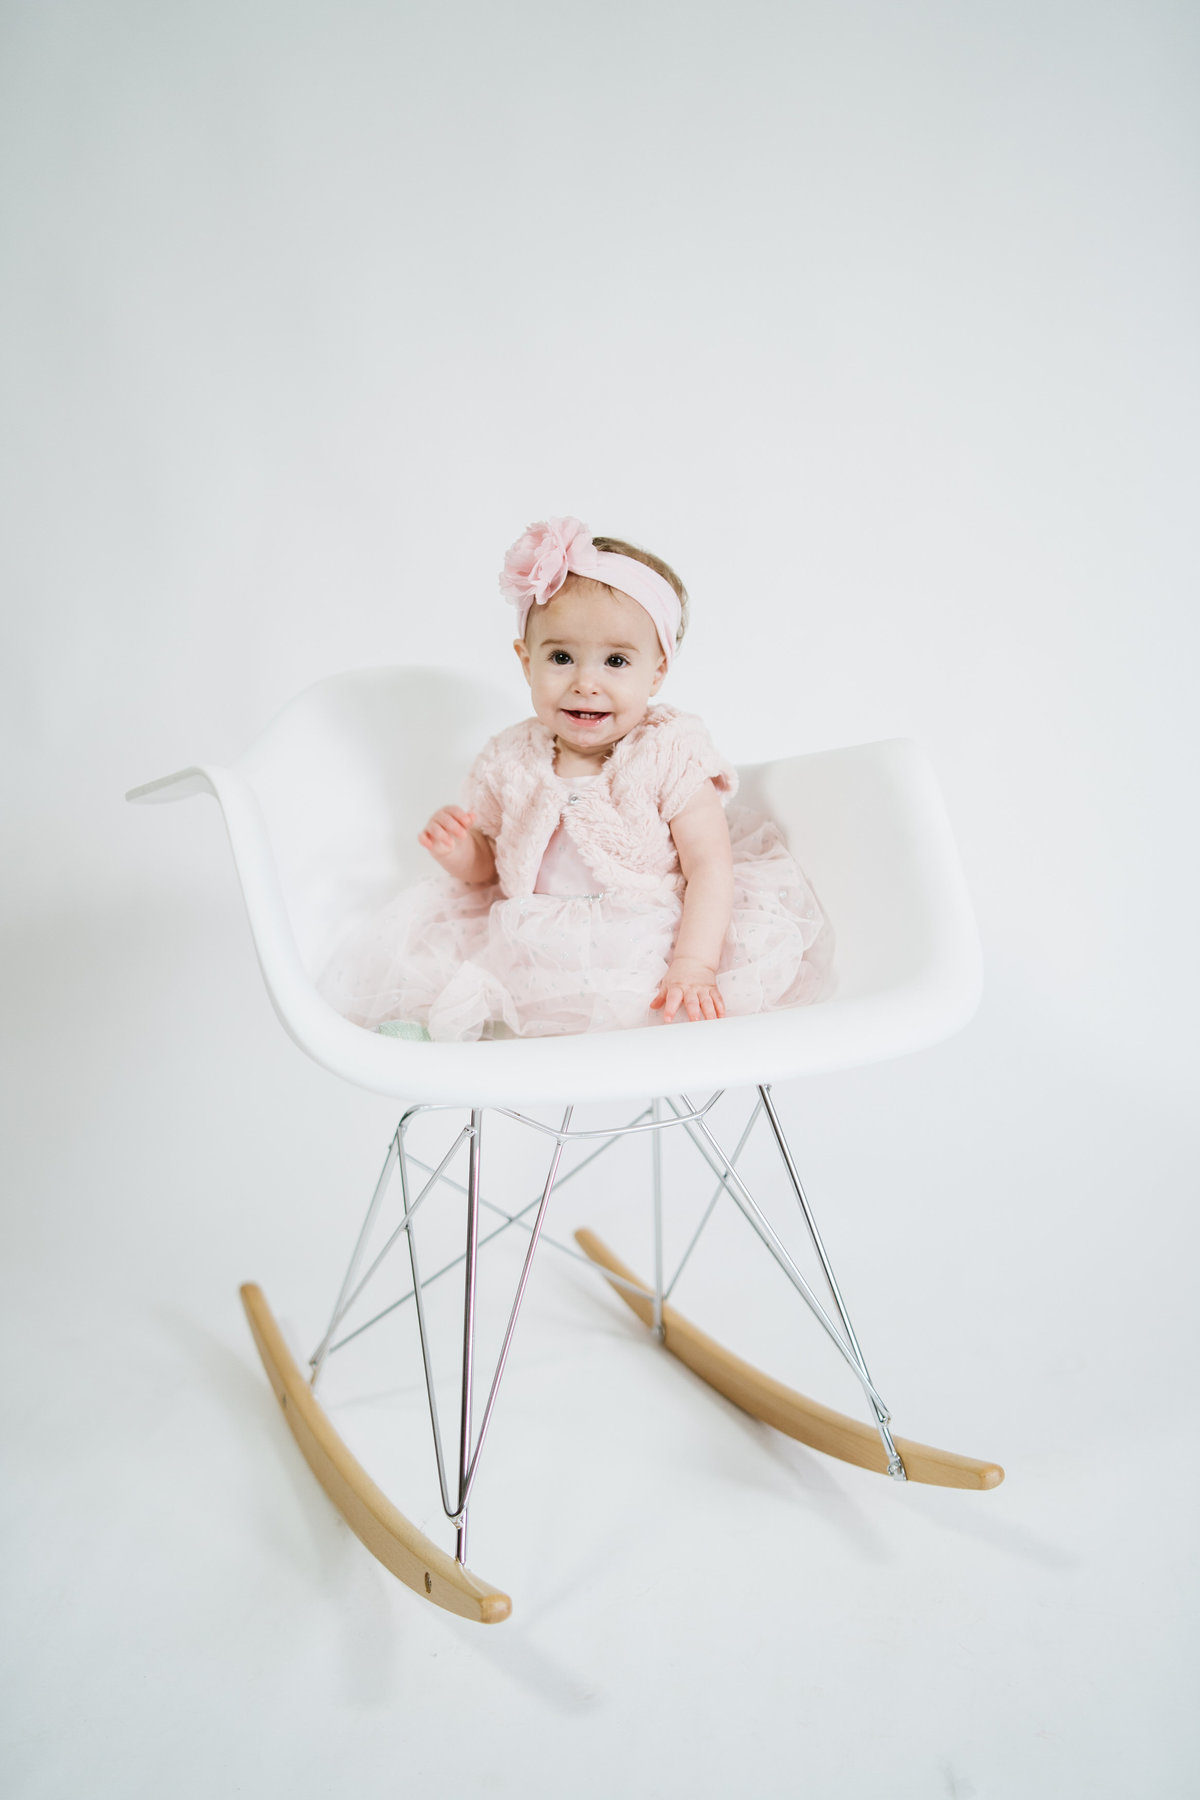 Baby toddler sitting in Eames rocking chair wearing pink dress in San Antonio photo studio on a white background